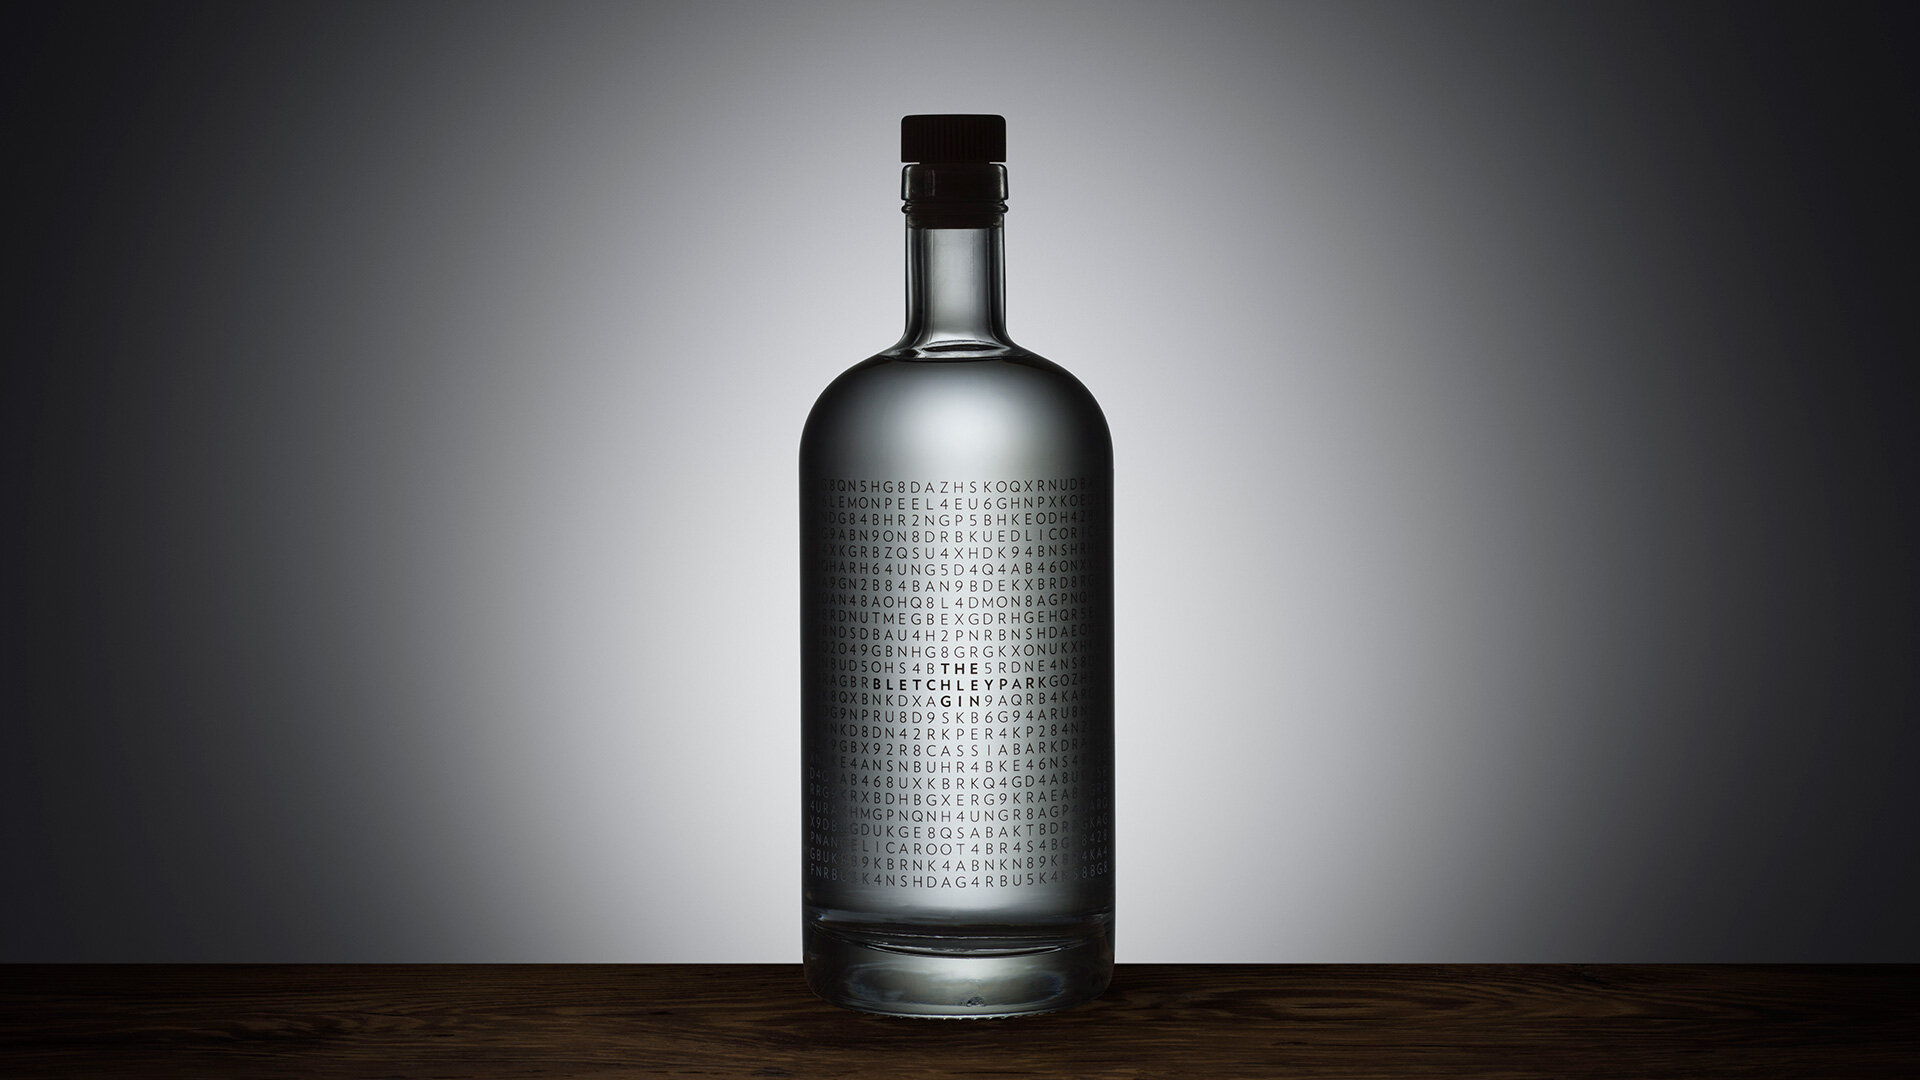 Bletchley Park Gin: packaging design